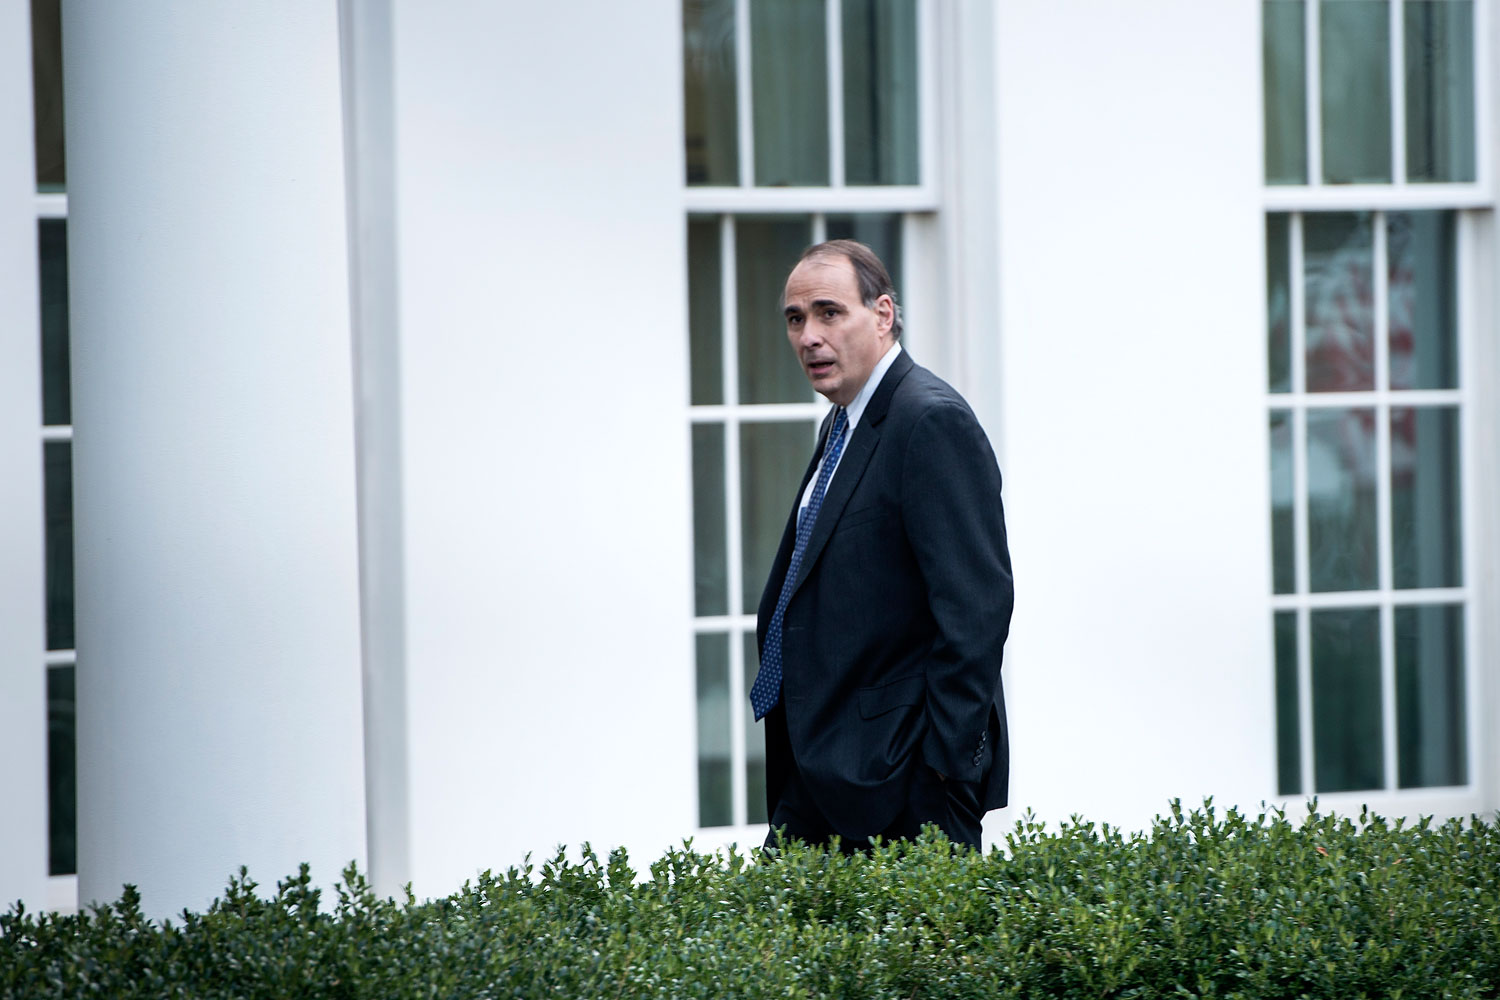 Former White House advisor David Axelrod walks into the West Wing of the White House on Nov. 15, 2013 in Washington. (Brendan Smialowski—AFP/Getty Images)